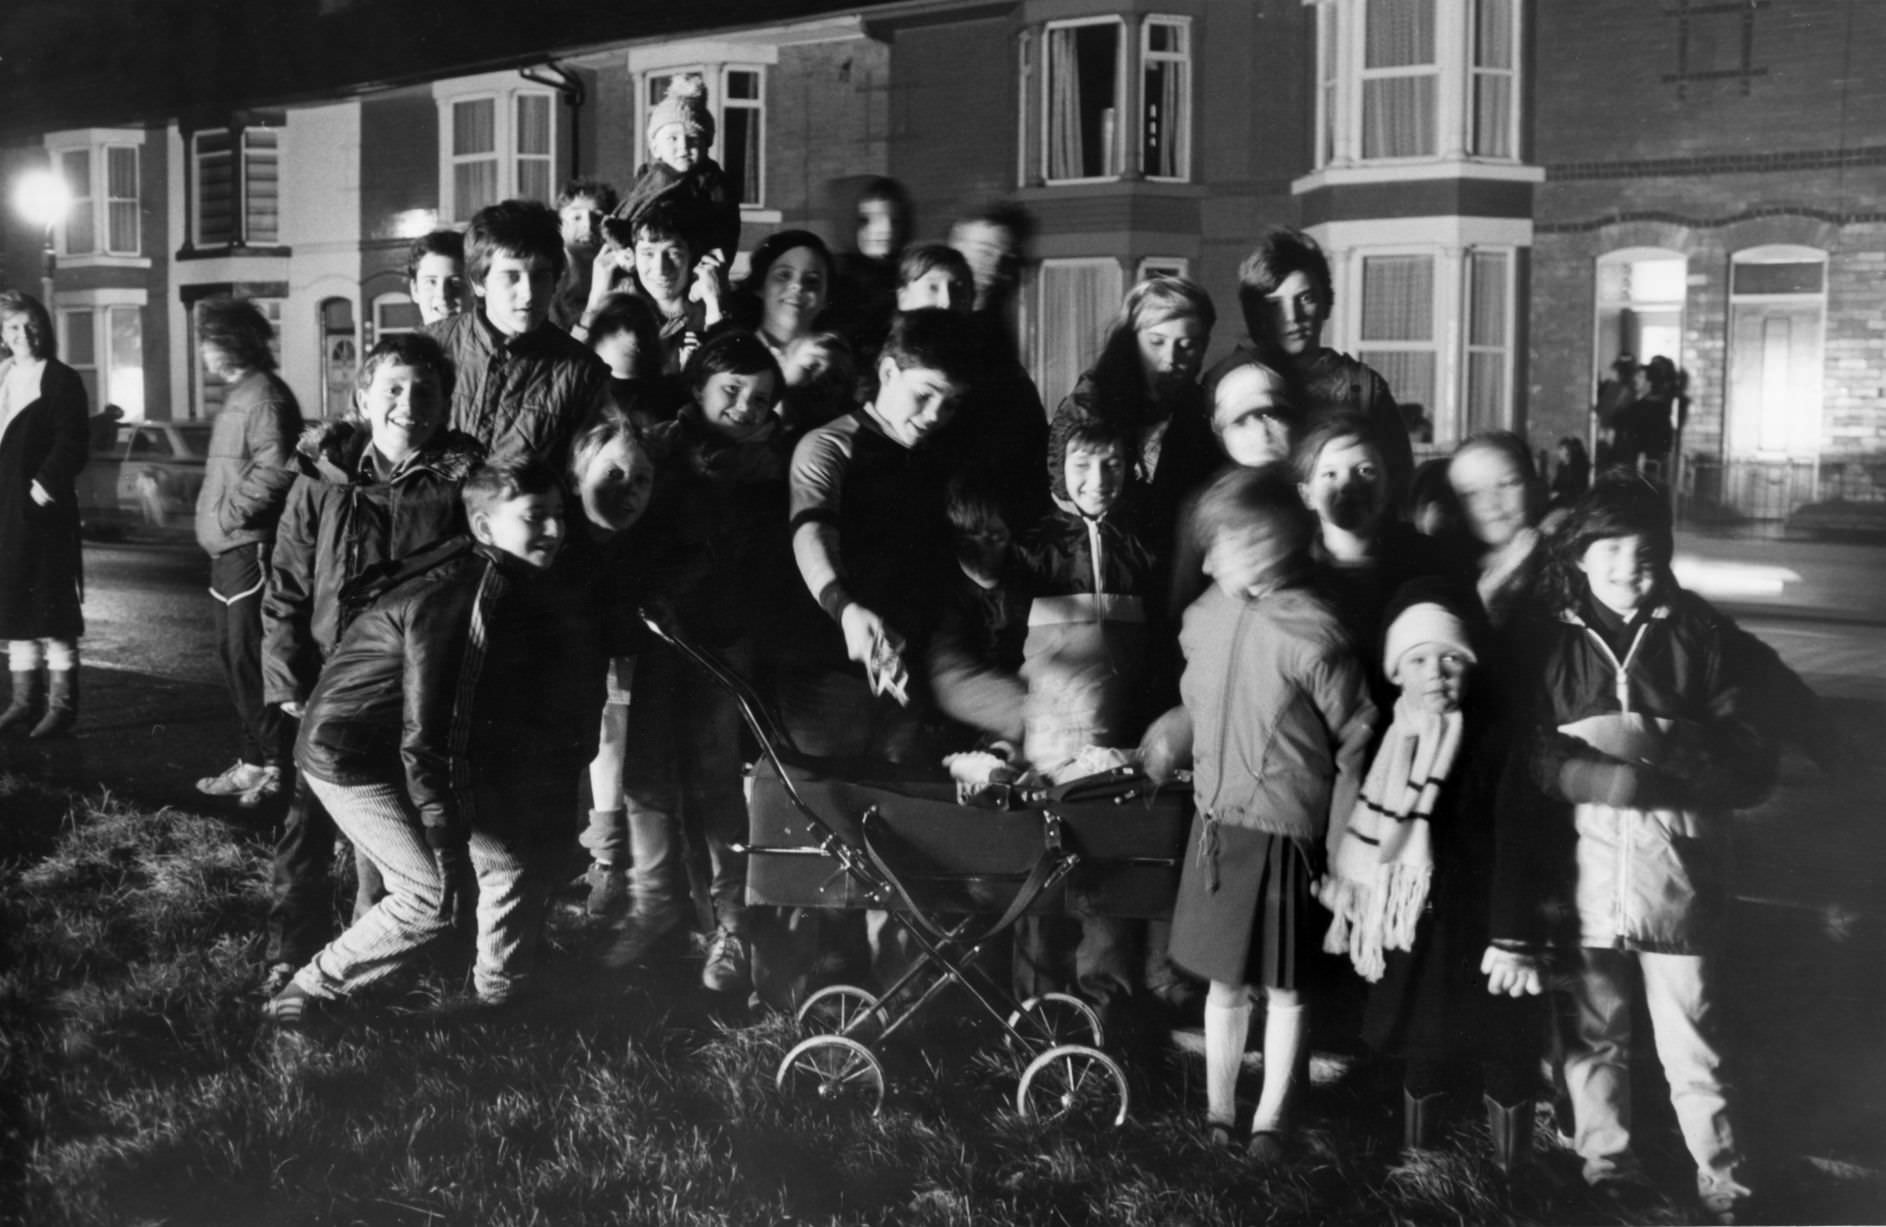 Residents of Hornby Boulevard, Bootle gather to watch a private bonfire and fireworks display, 5th November 1987